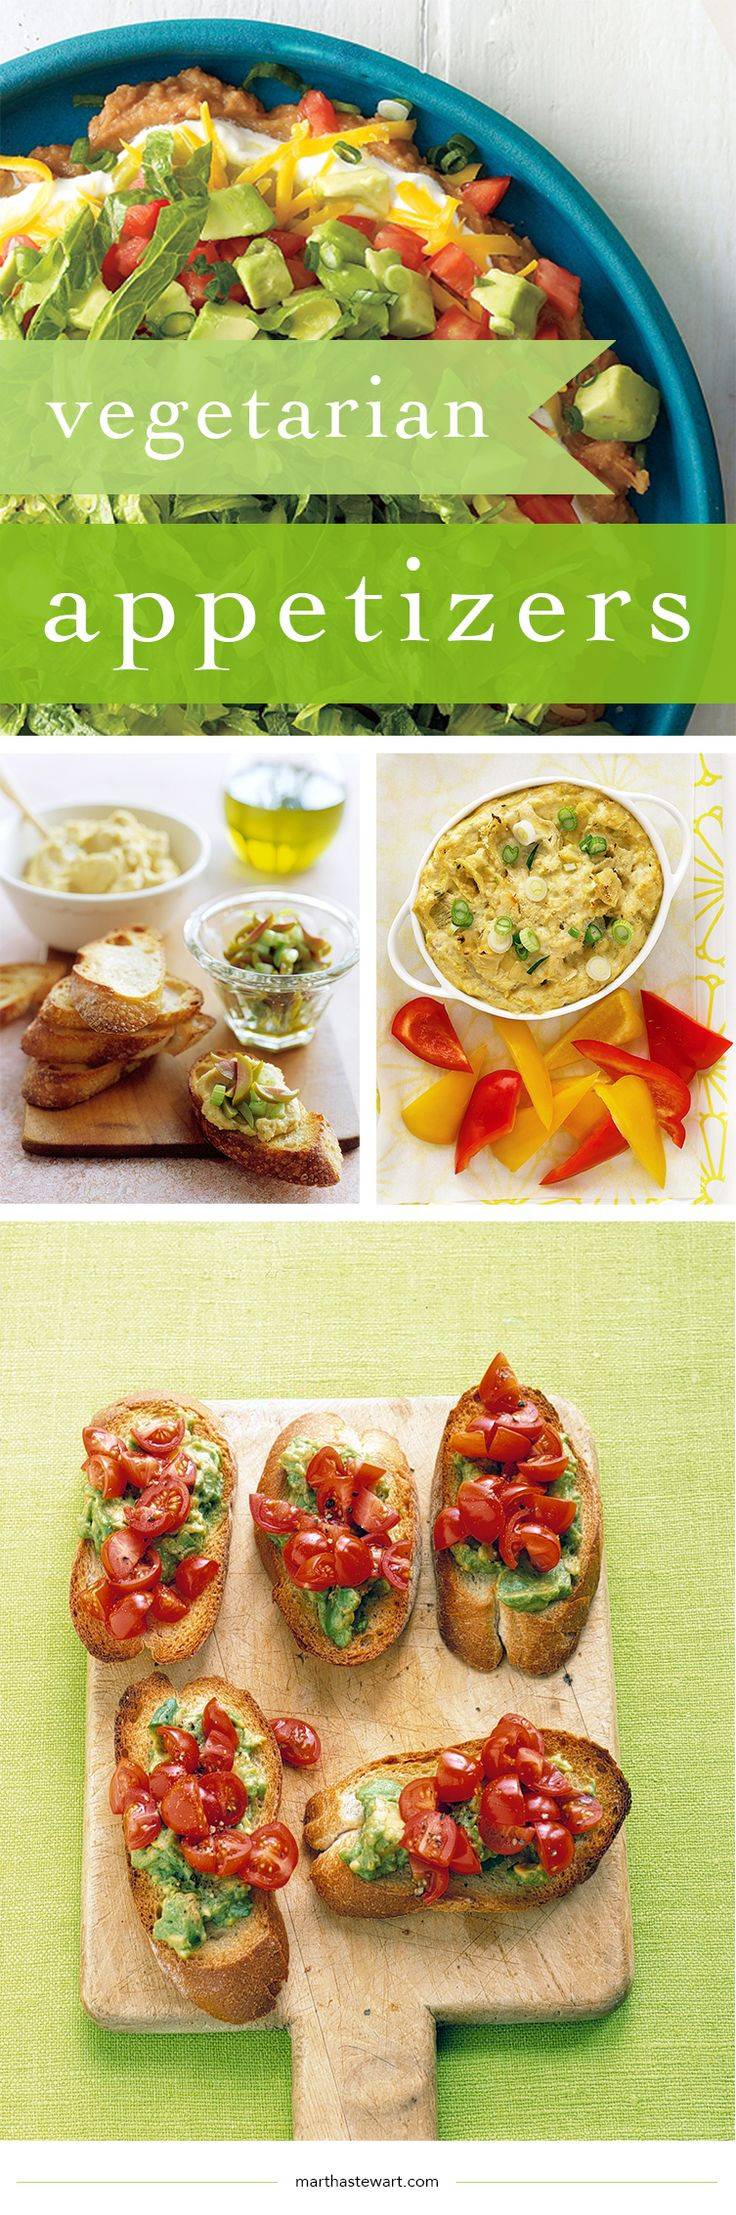 Vegetarian Party Appetizers
 The 25 best Elegant dinner party ideas on Pinterest